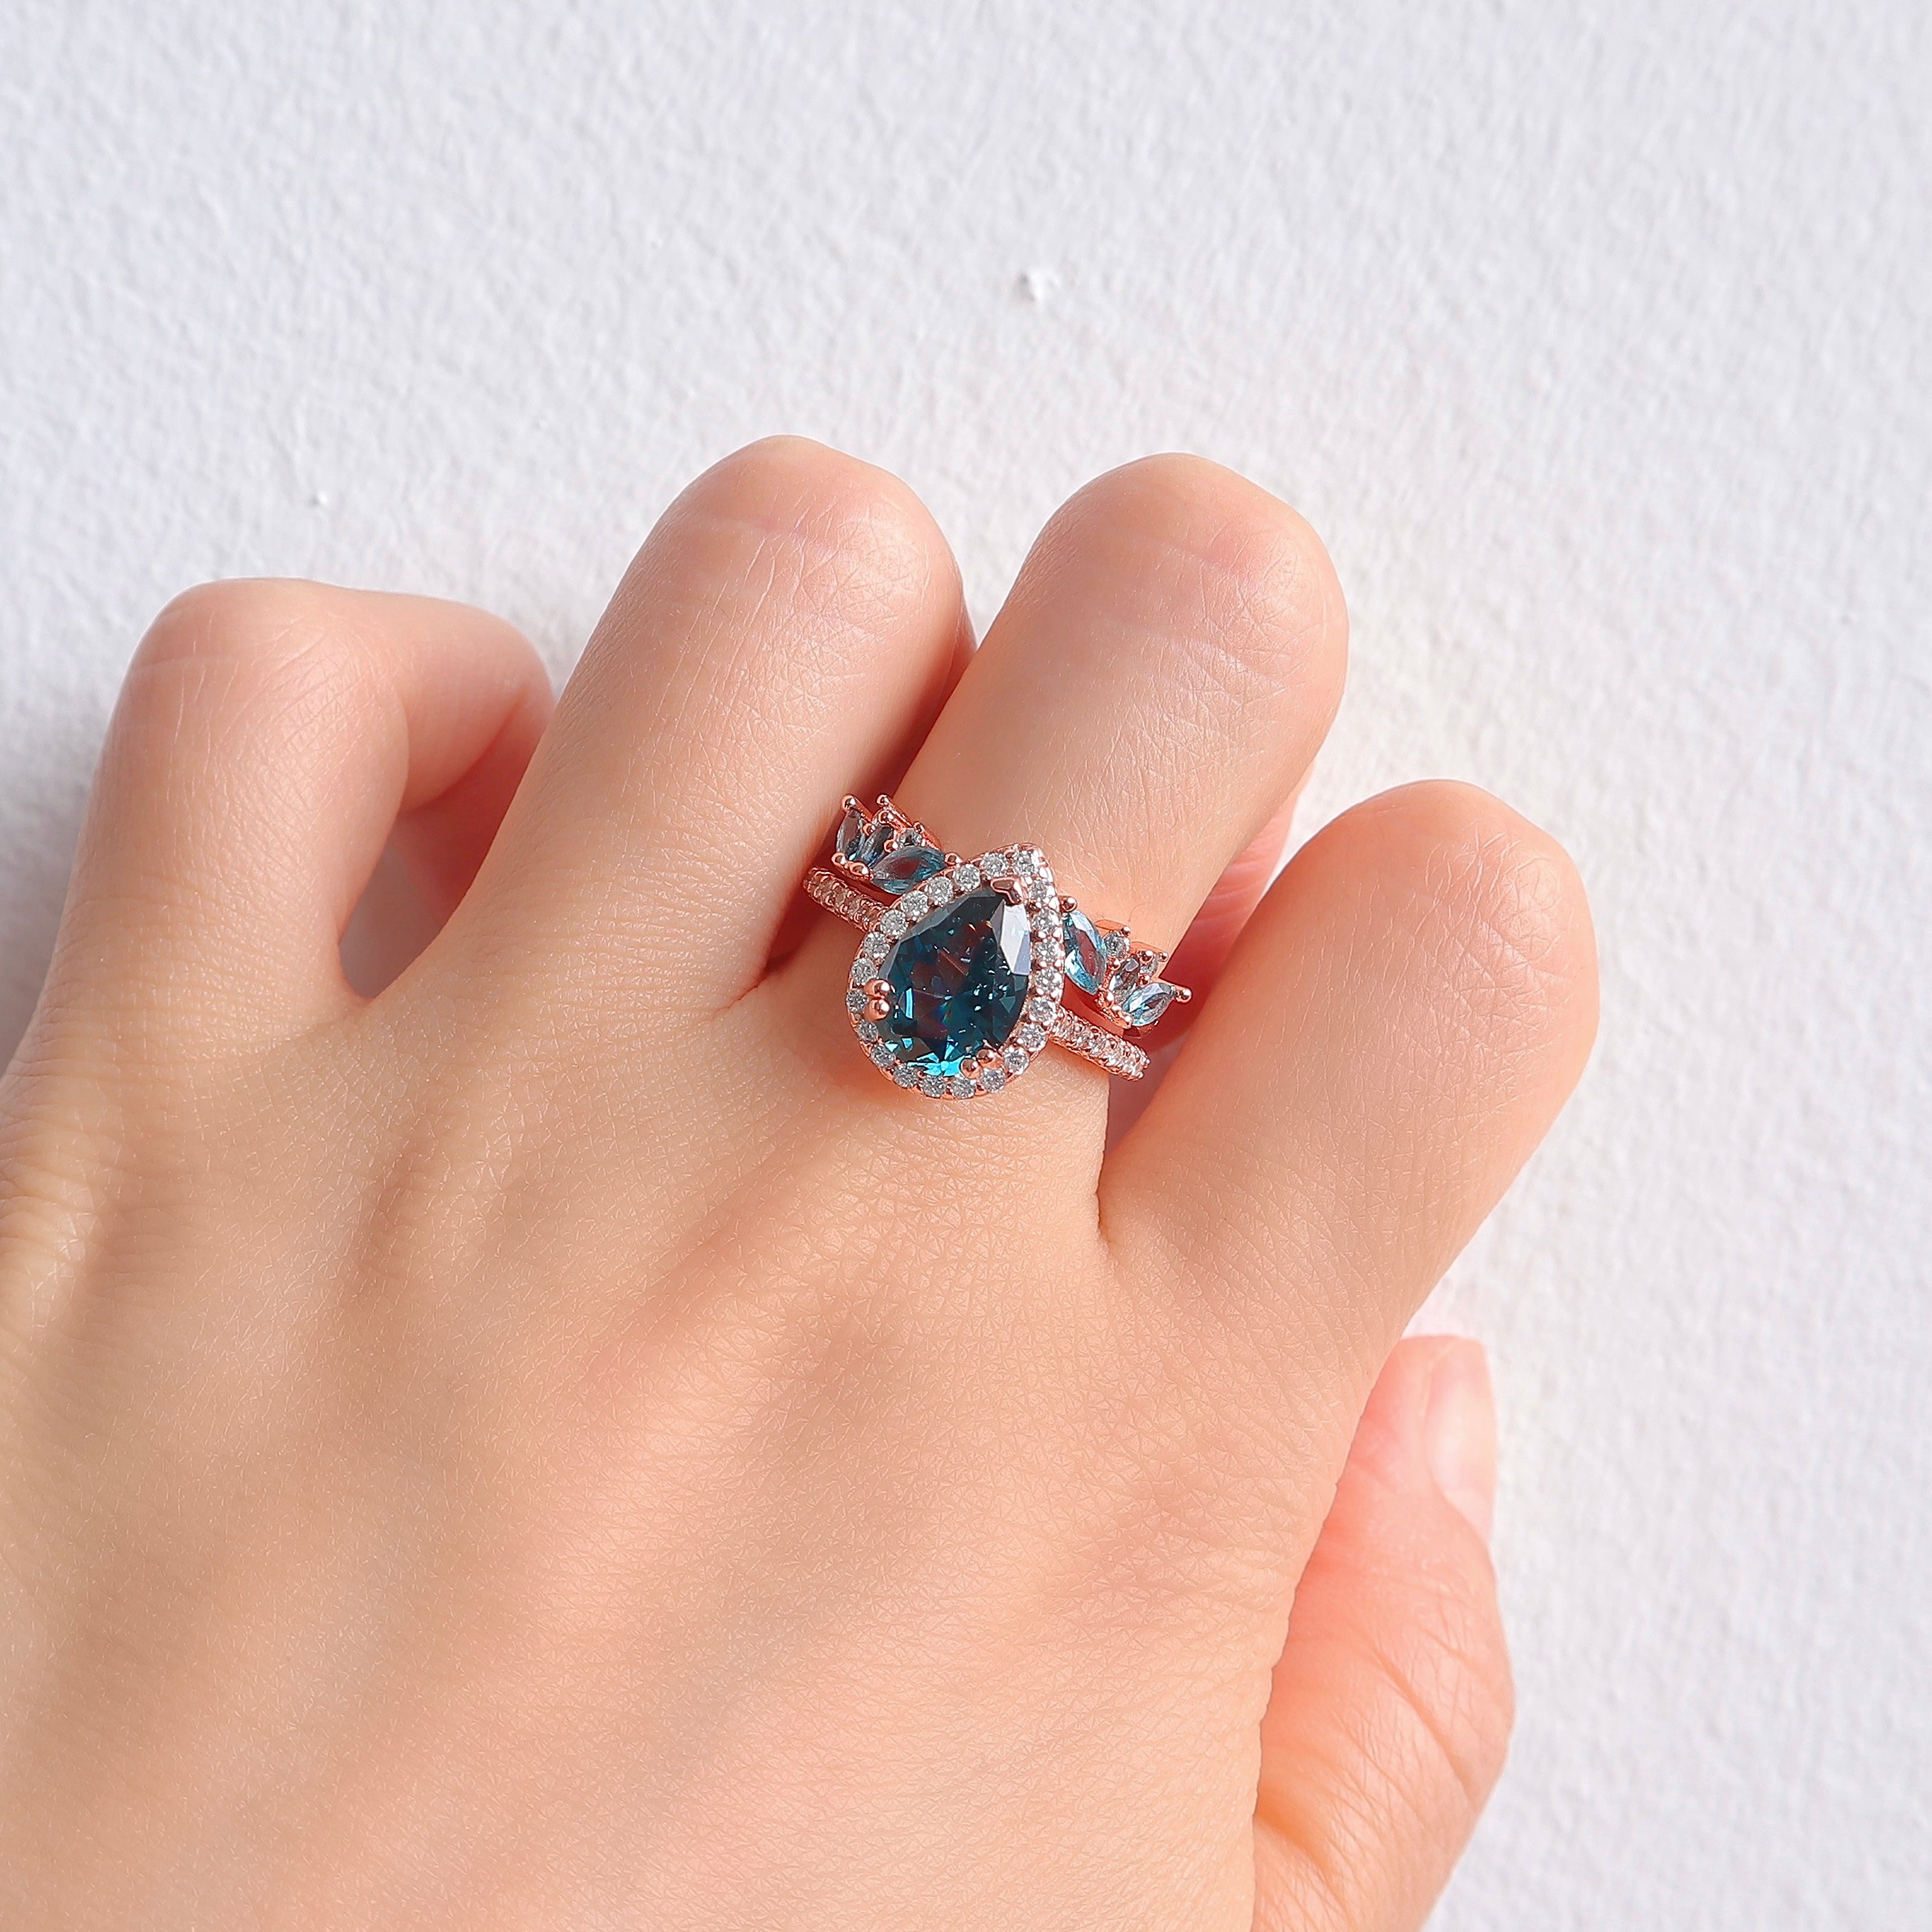 Blue Topaz Sterling Silver Ring with Diamond Accent